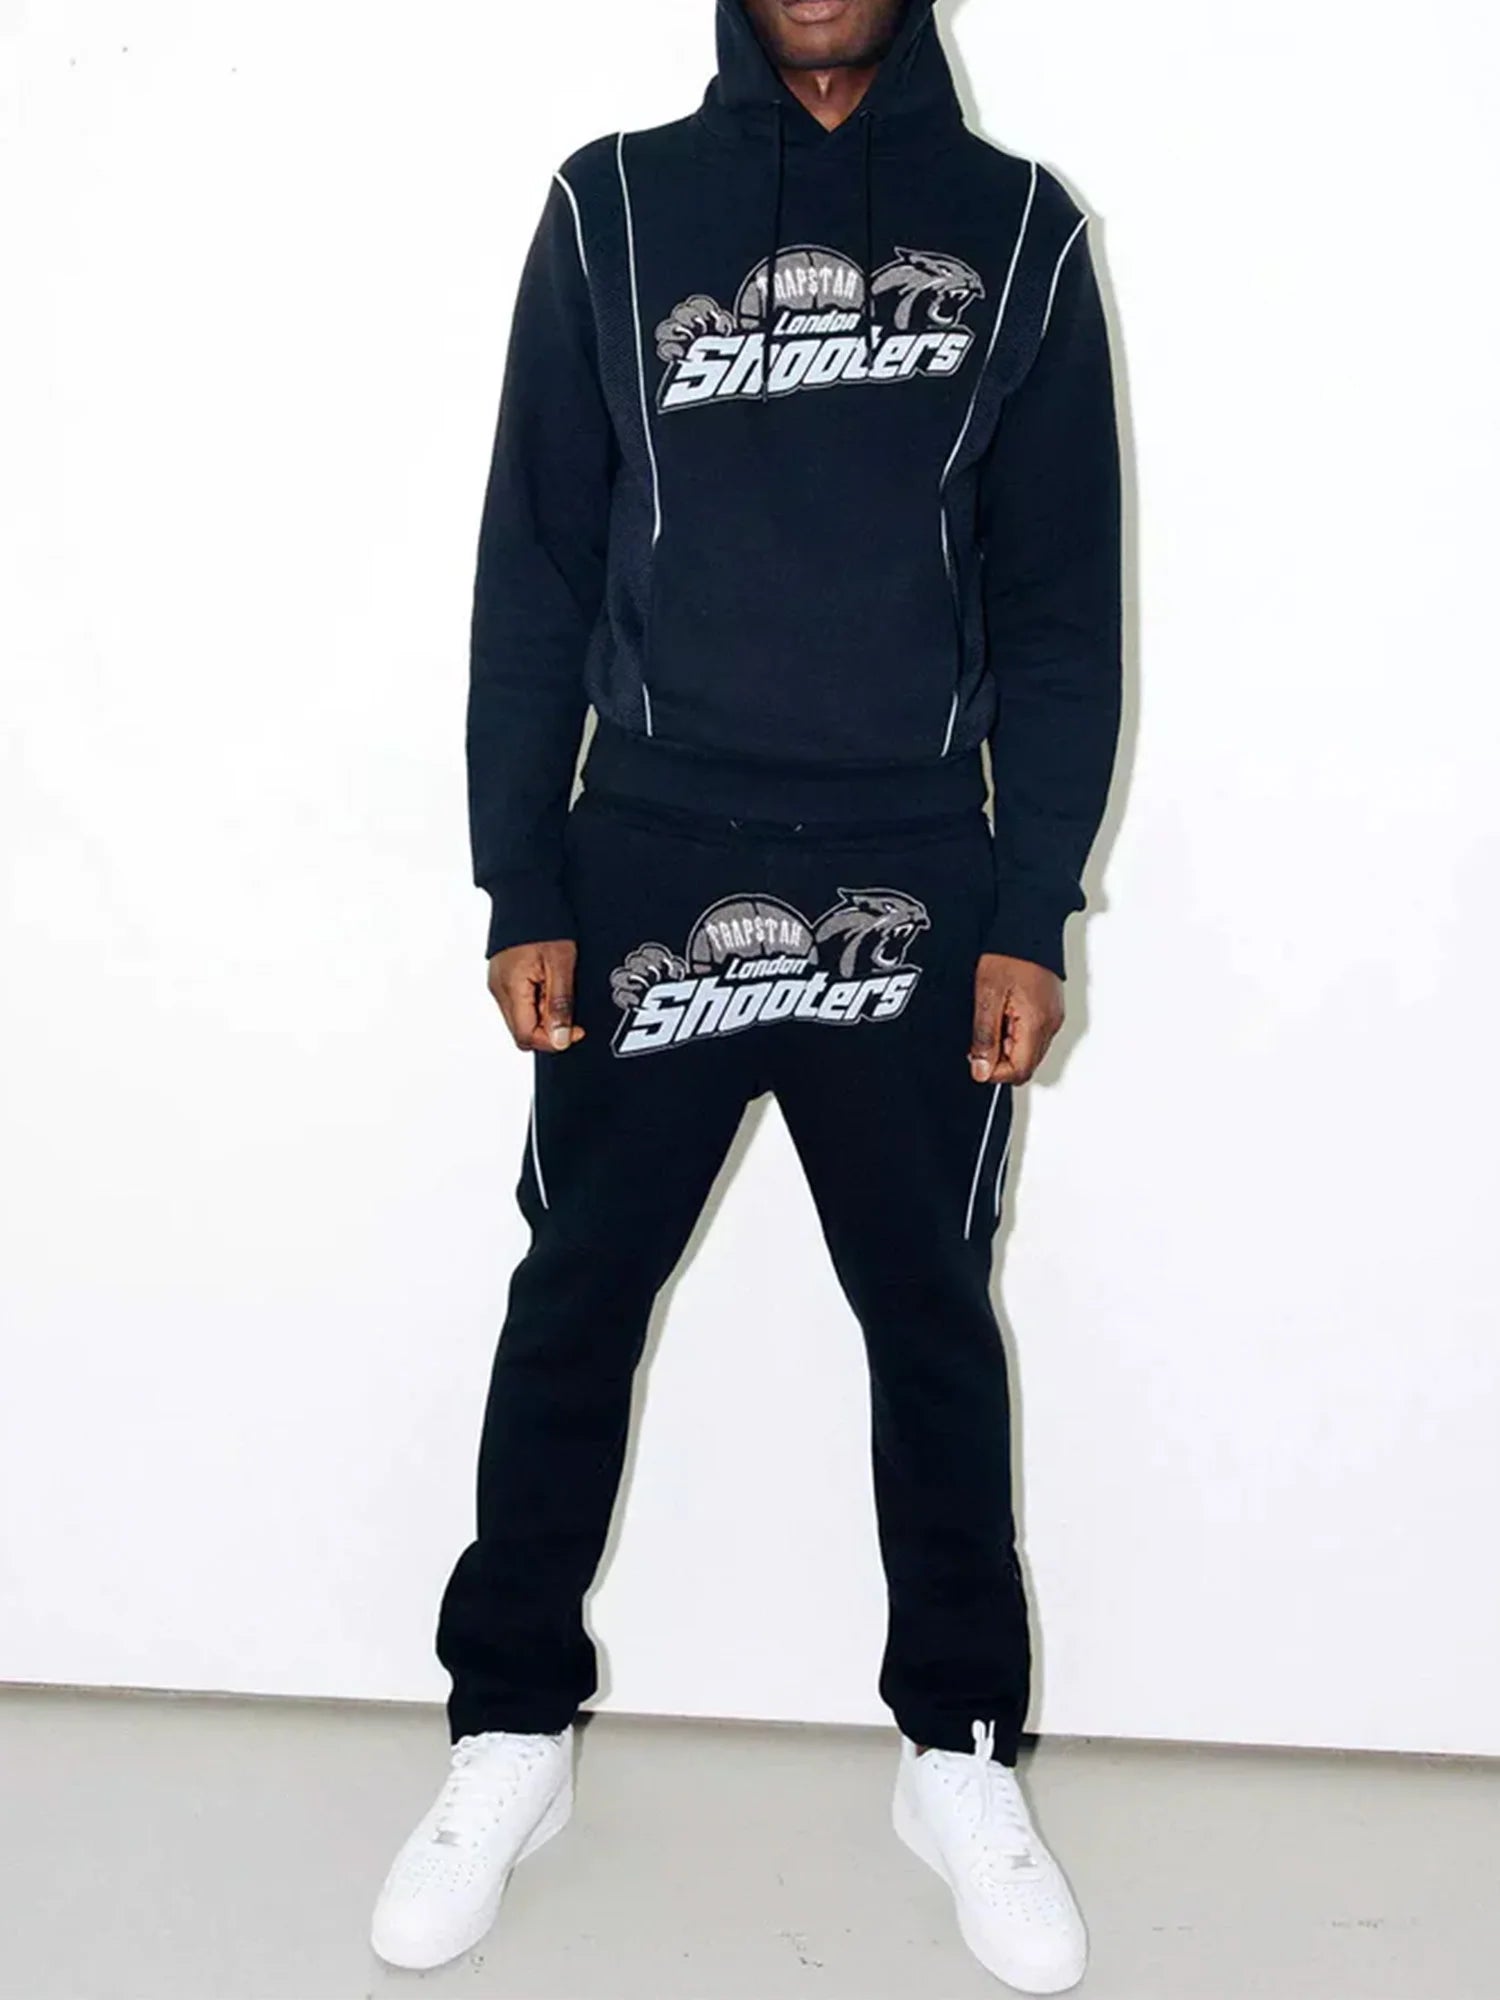 Trapstar Technical Shooters Tracksuit Black/Blue